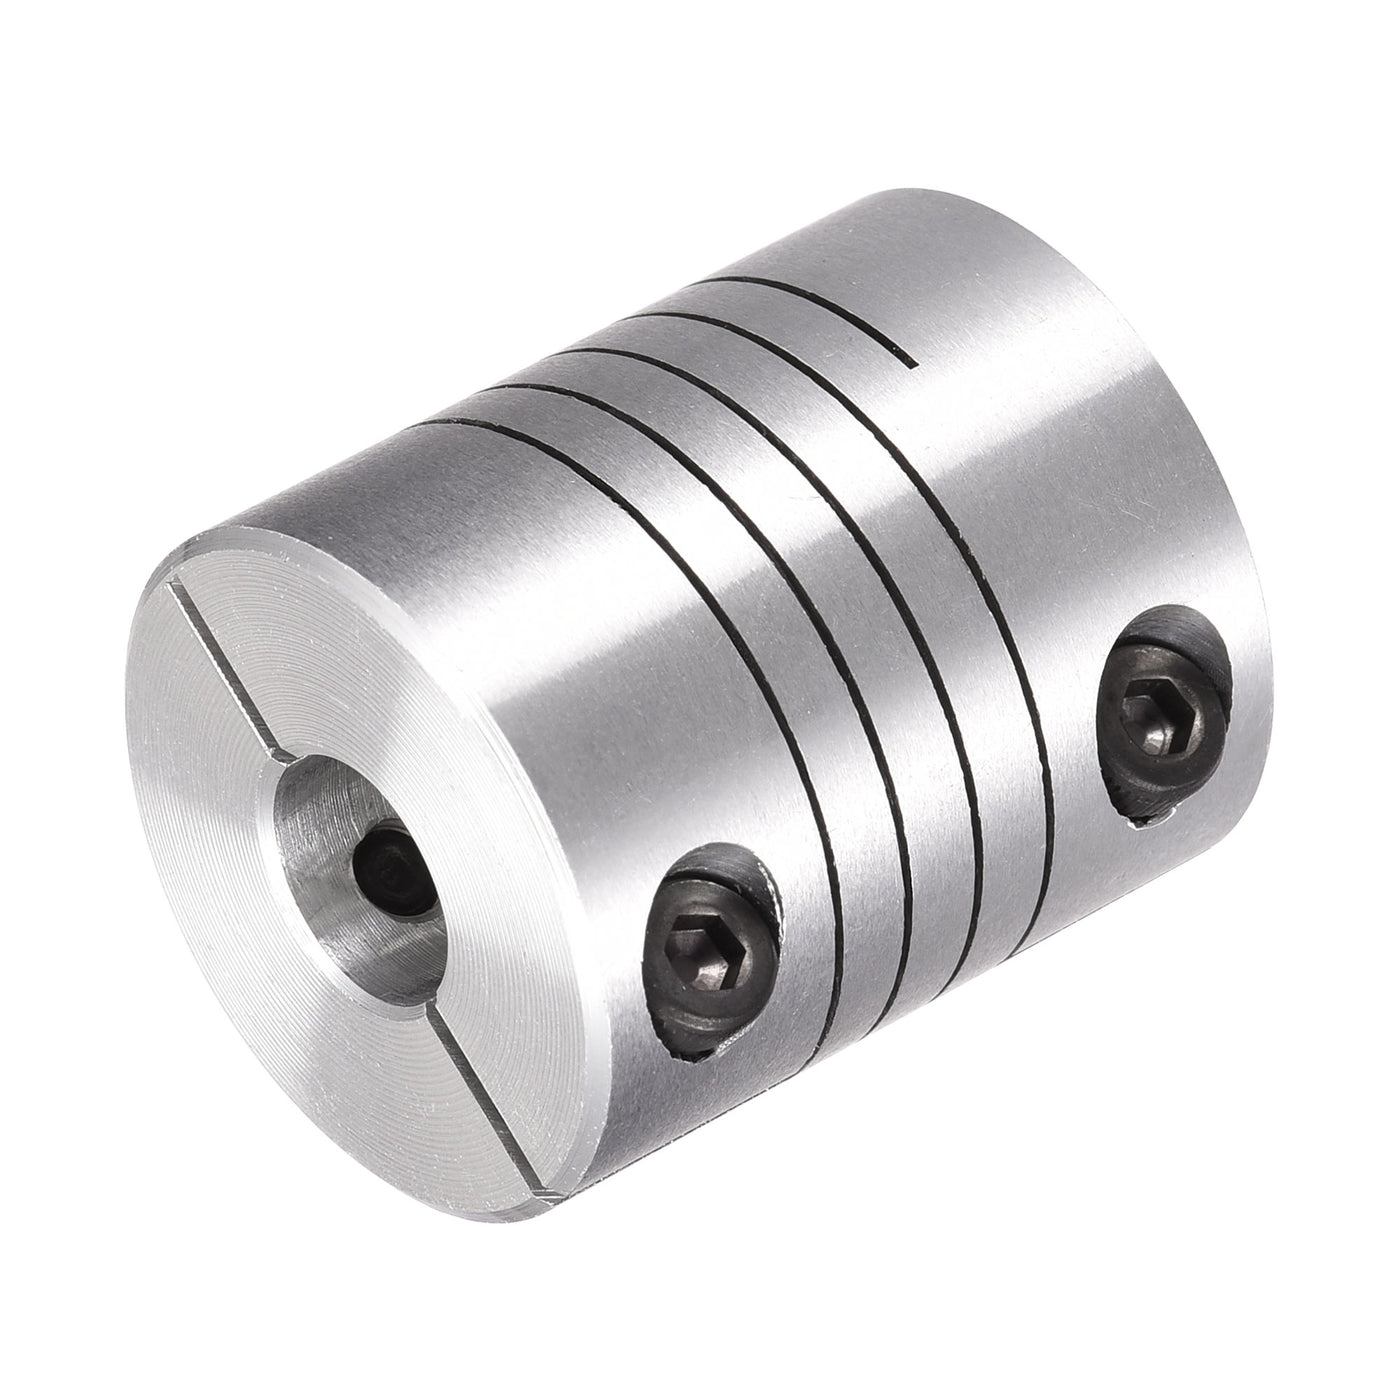 uxcell Uxcell Motor Shaft 6mm to 9mm Helical Beam Coupler Coupling 25mm Dia 30mm Length